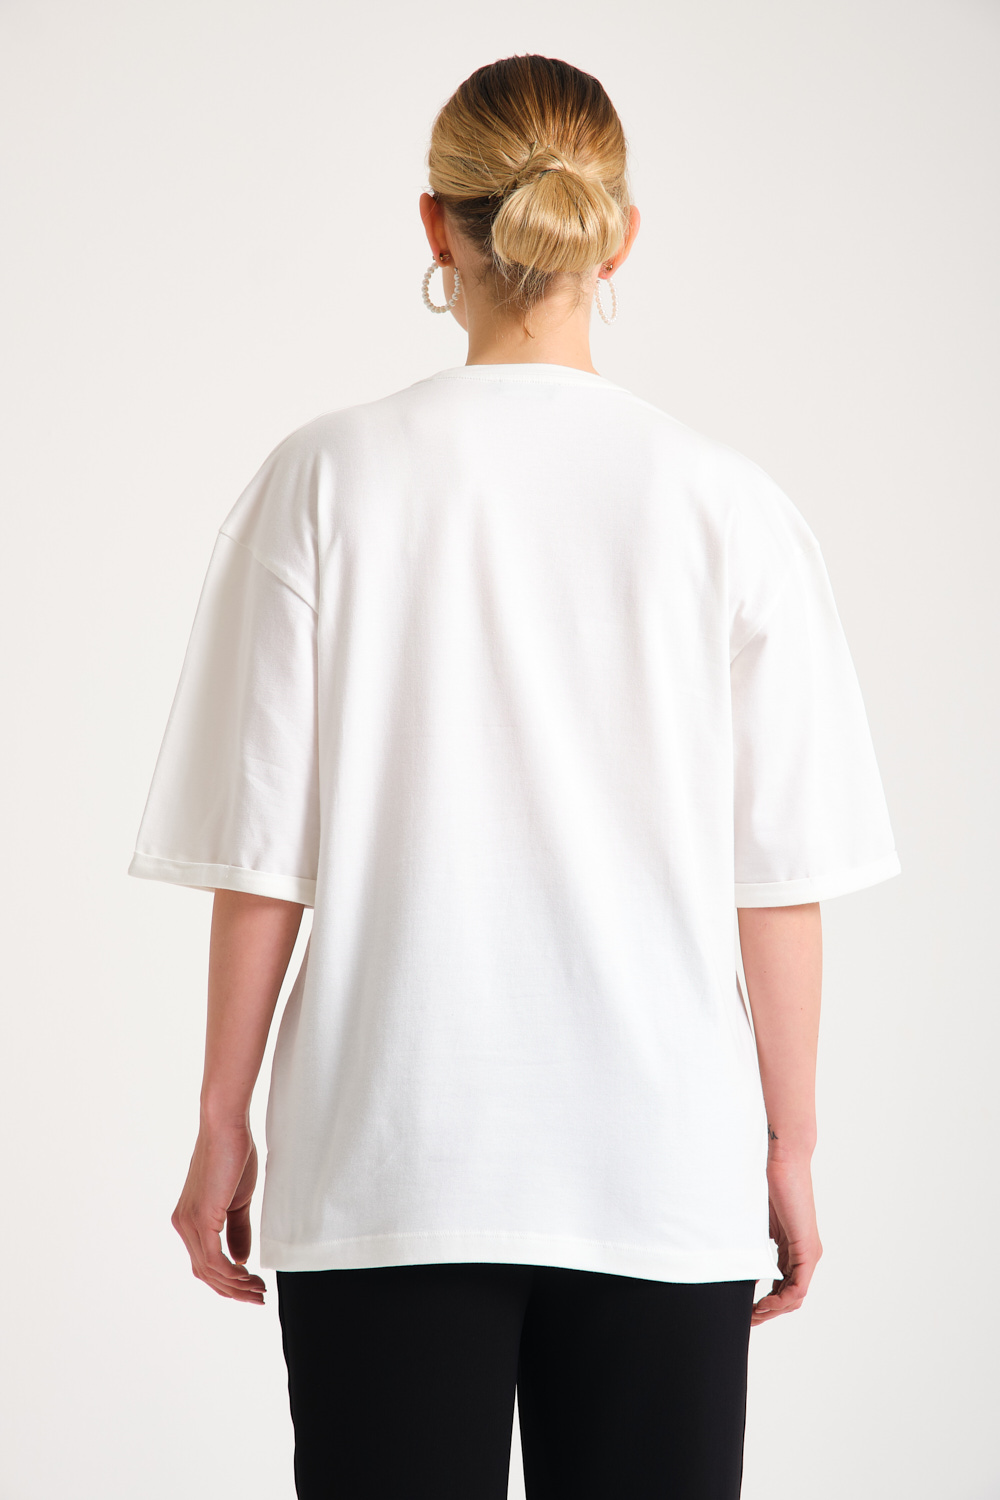 Crew Neck Front Pearl Detailed White T-Shirt